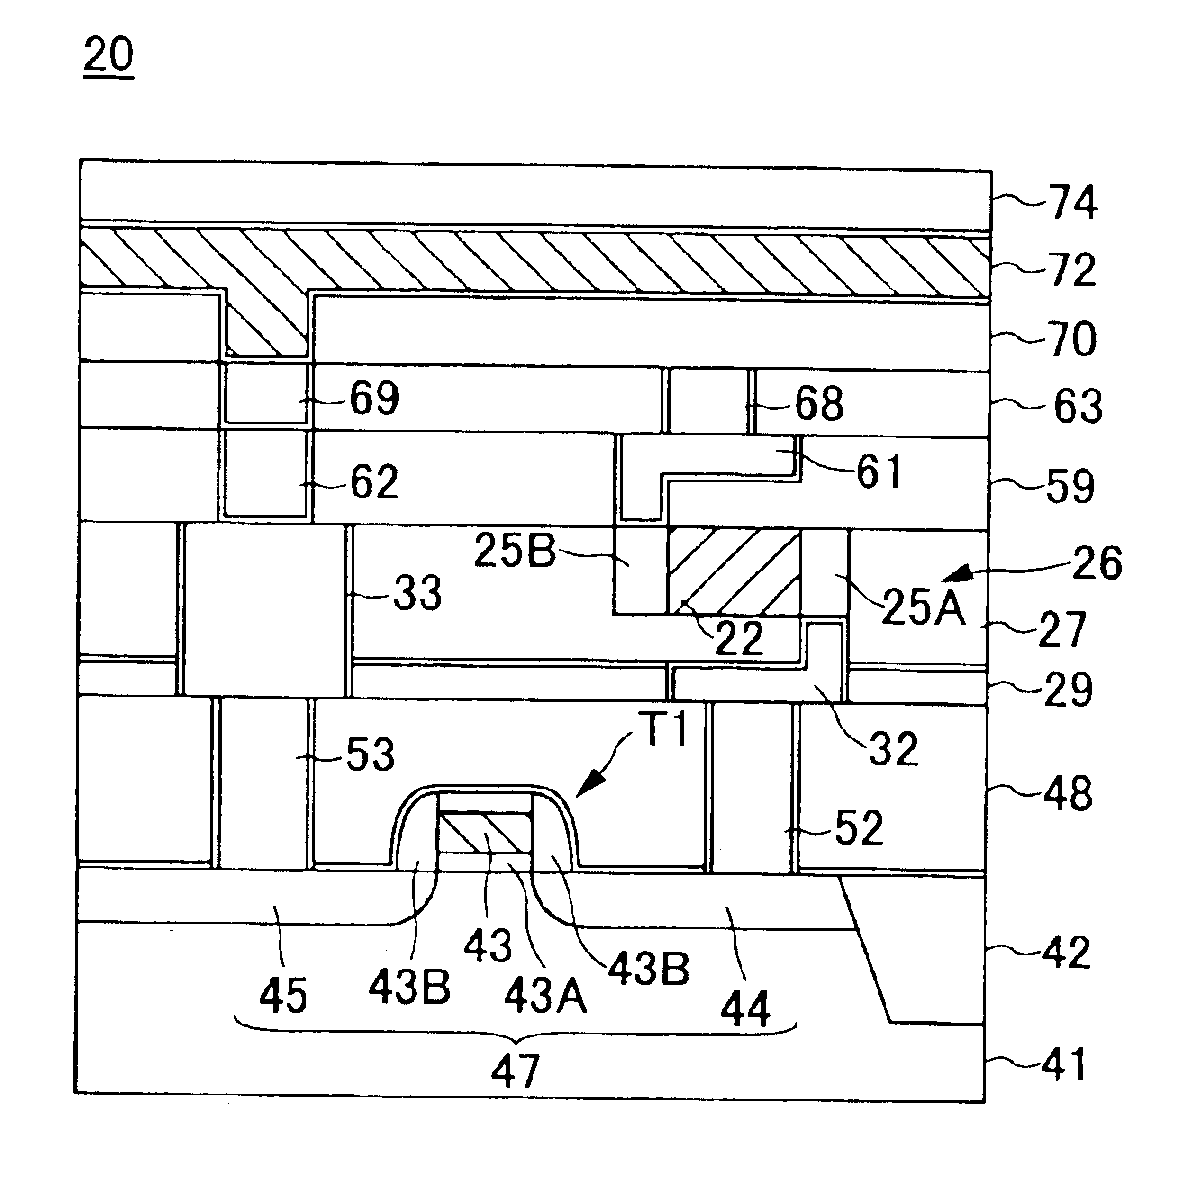 Method of manufacturing the semiconductor device